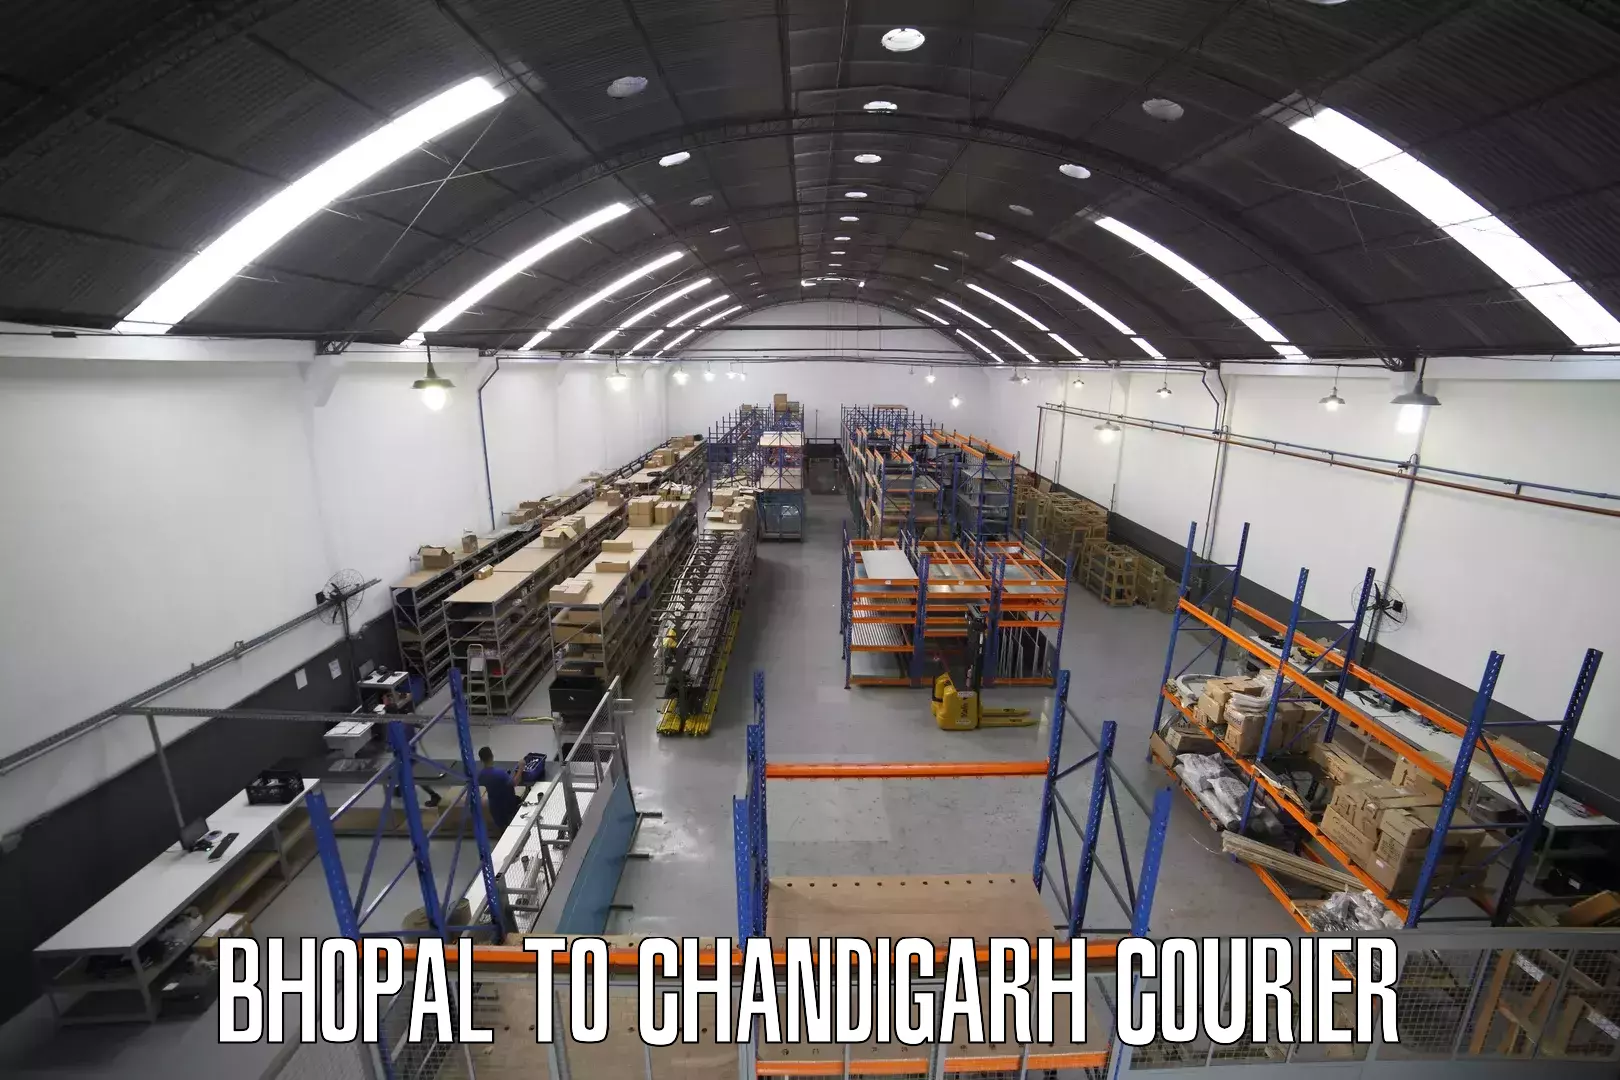 Advanced shipping network Bhopal to Chandigarh